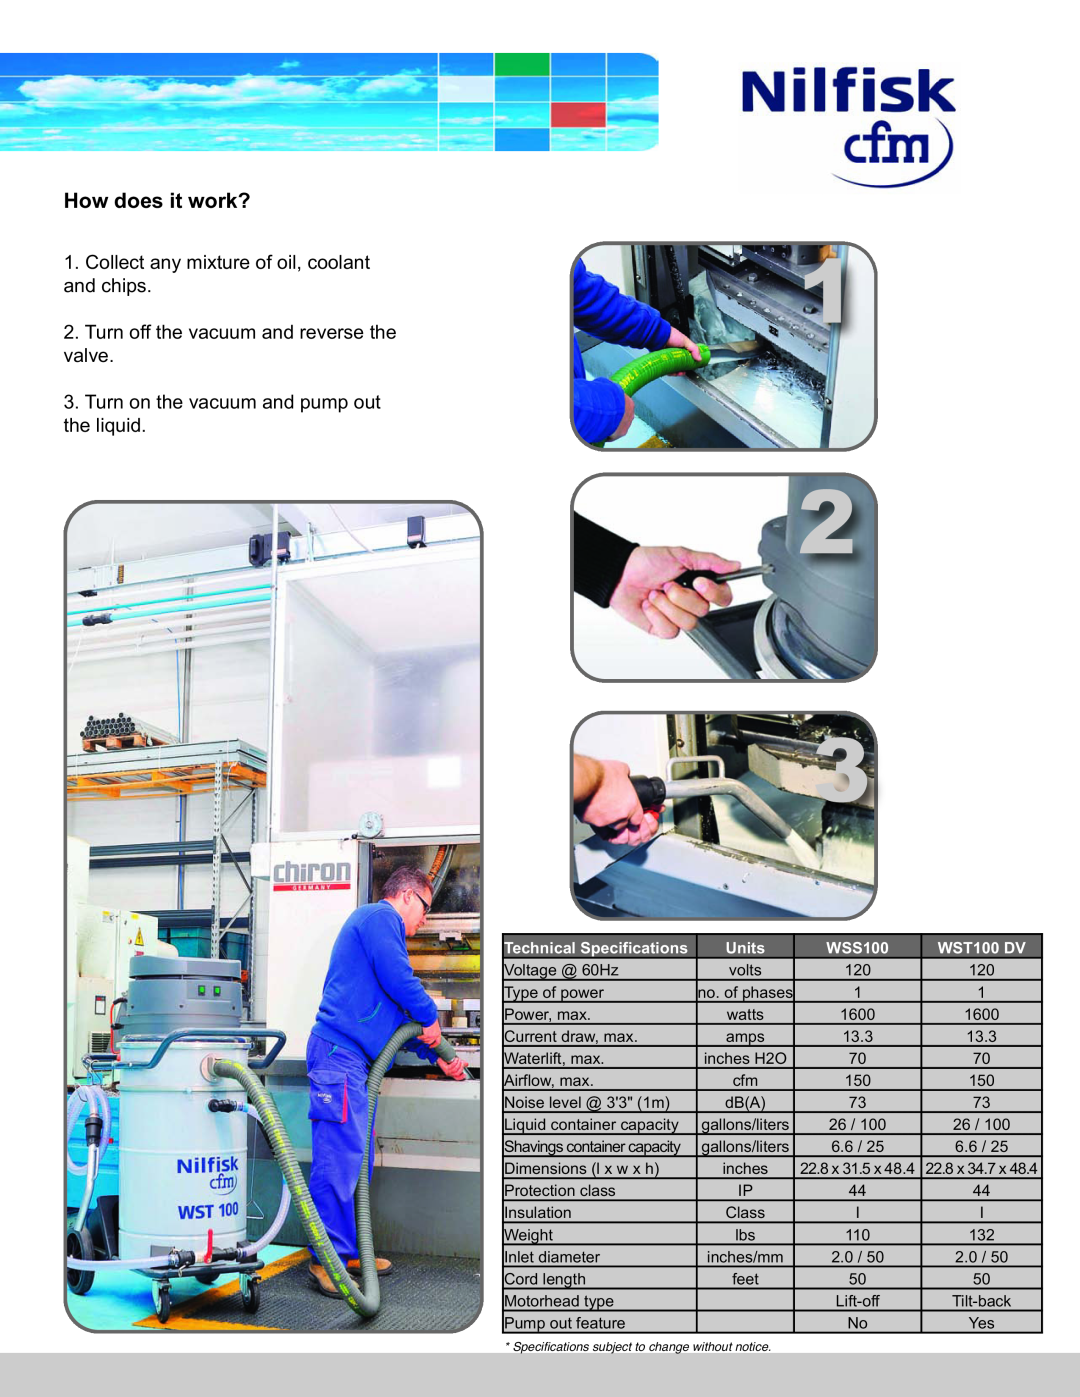 Nilfisk-Advance America WSS 100 How does it work?, Collect any mixture of oil, coolant and chips, Technical Specifications 